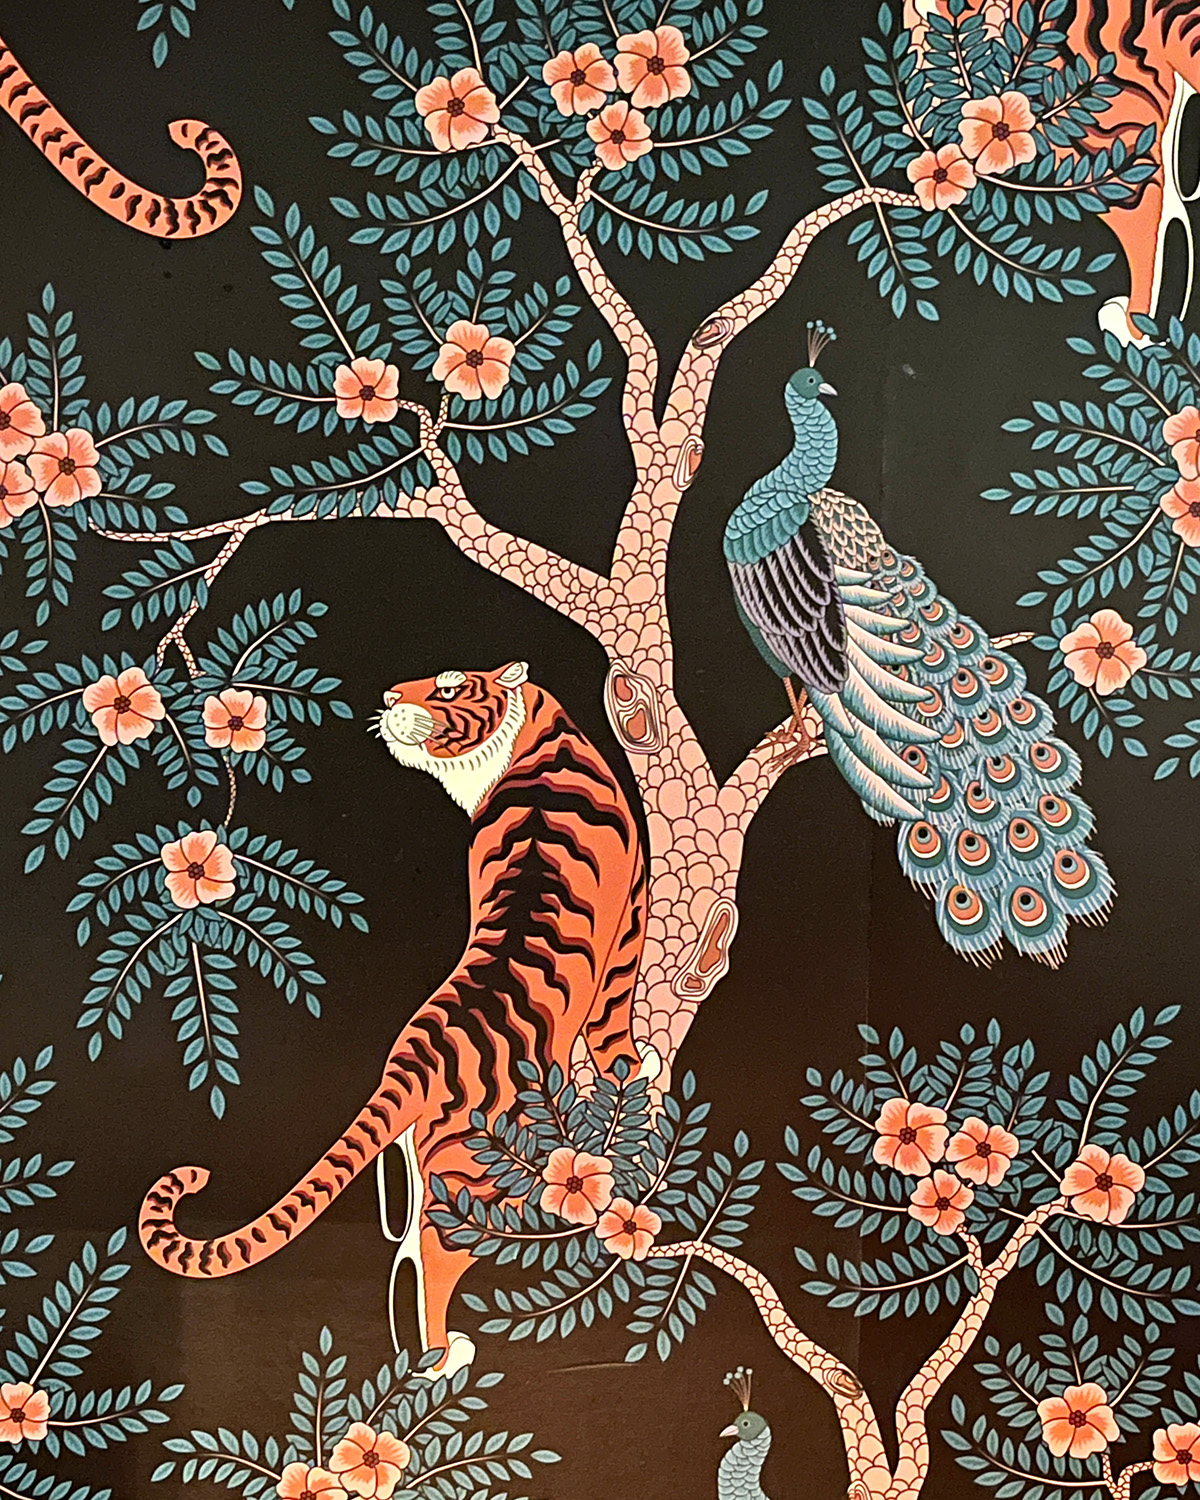 Easy Tiger wallpaper with tiger and peacock motif